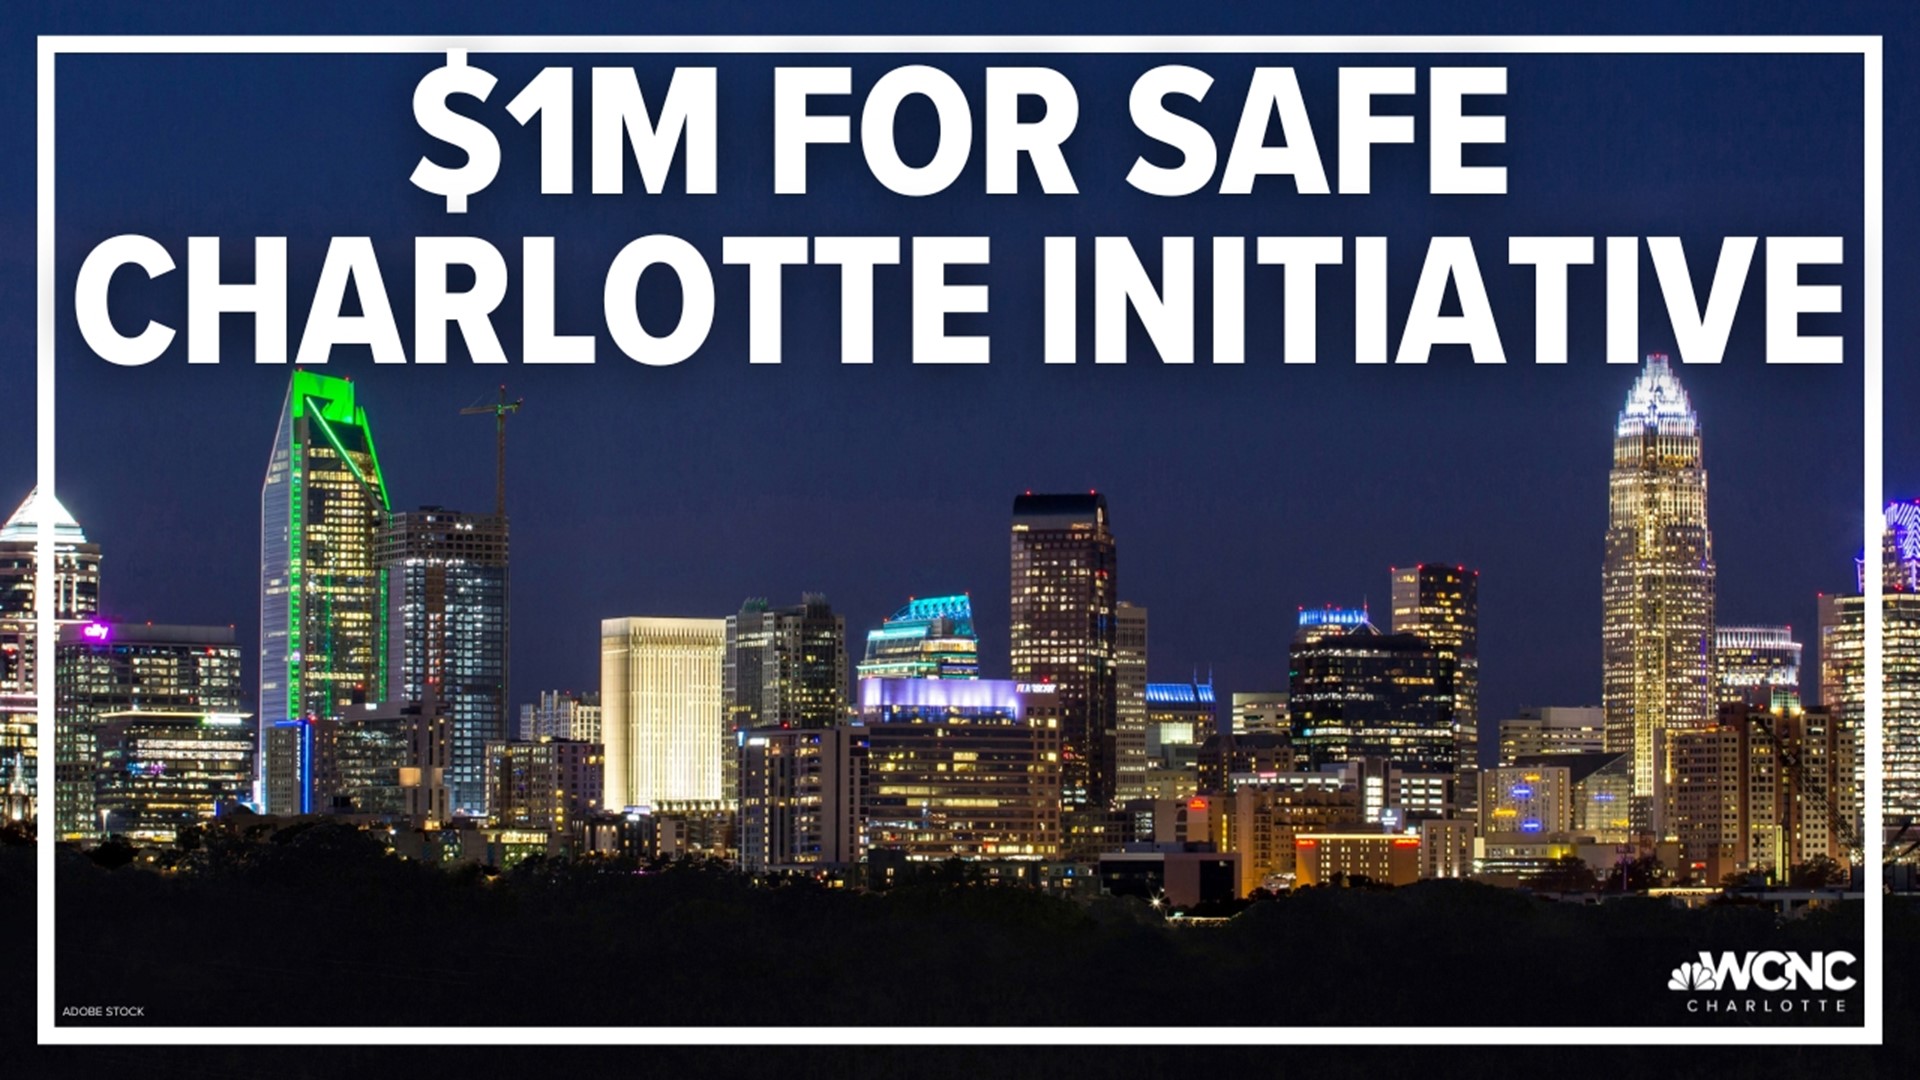 Charlotte-Mecklenburg Police Department Chief Johnny Jennings also provided an update on SAFE Charlotte, an anti-violence program in the city.